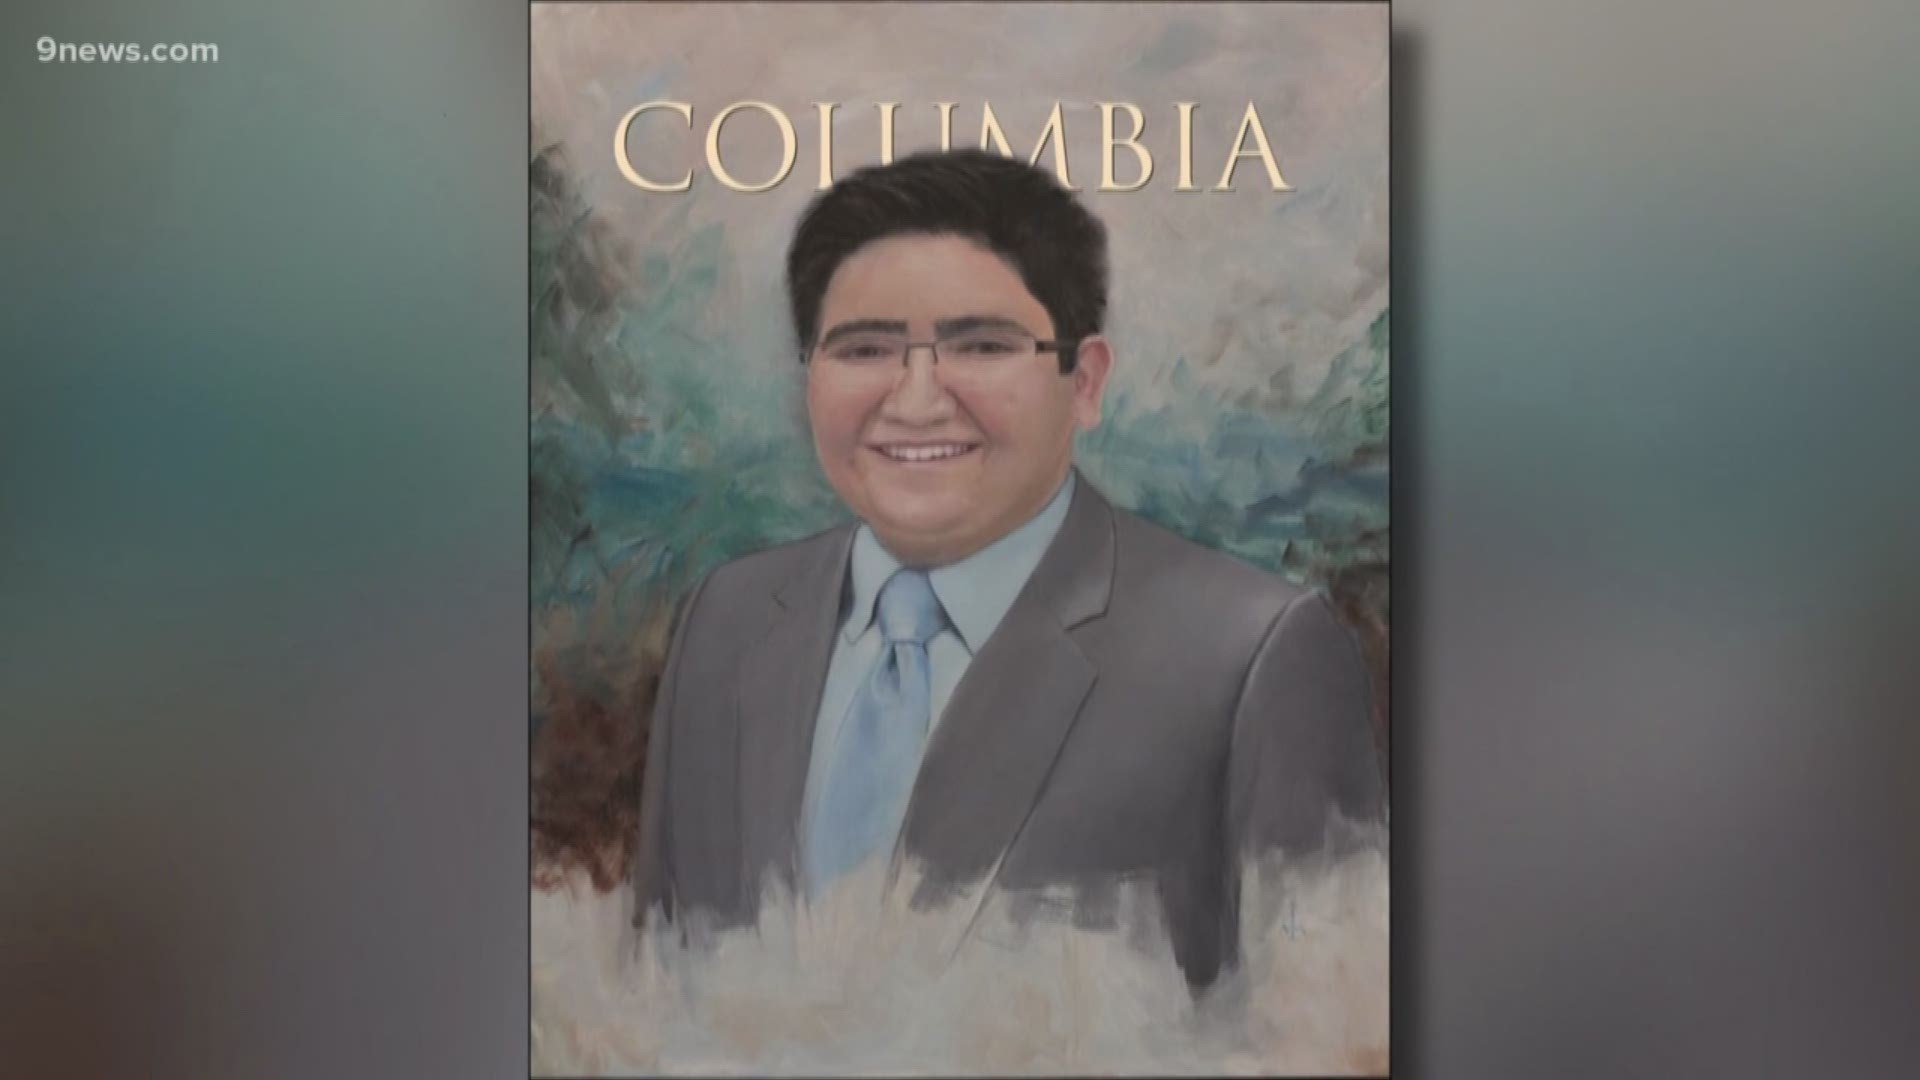 Kendrick Castillo, the student killed at STEM School Highlands Ranch while saving his classmates, was honored Tuesday hundreds of miles away from Colorado.